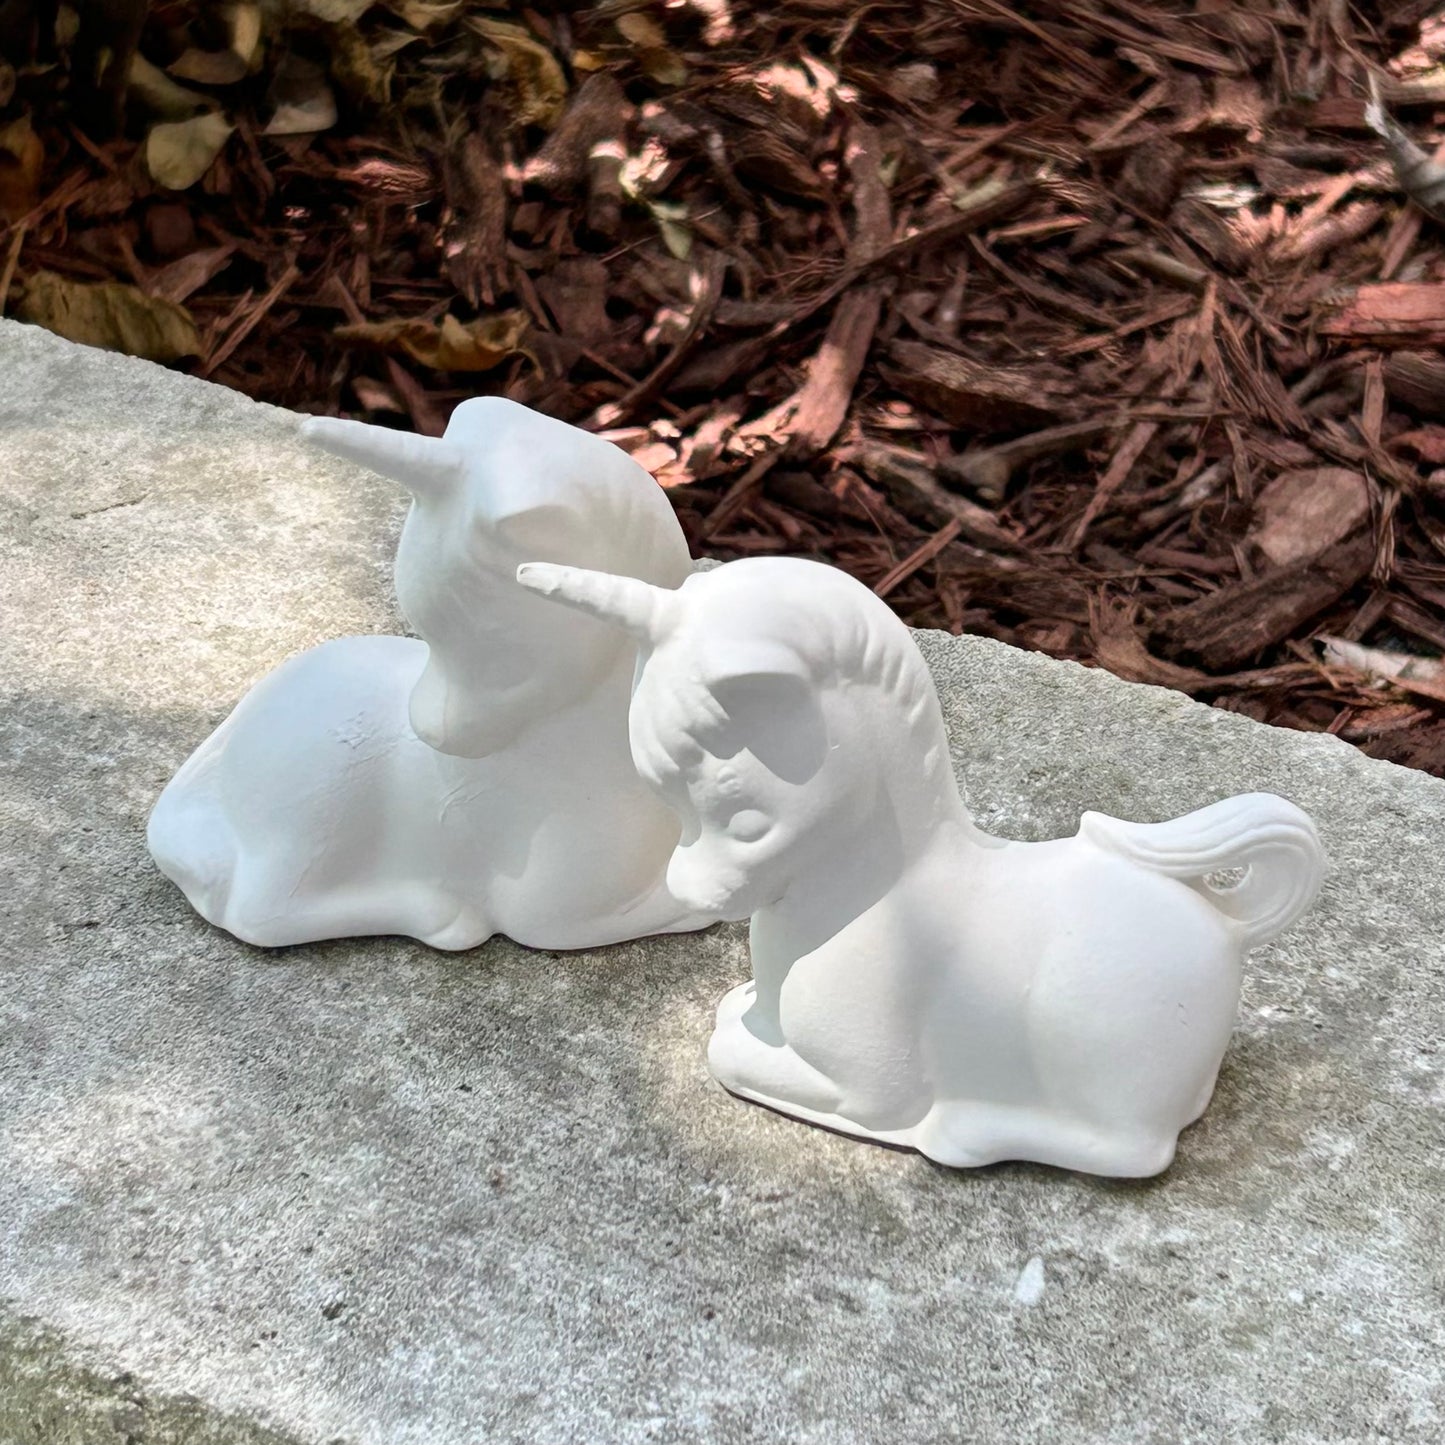 2 Ready to Paint Unicorn Figurines sitting on a white stone by a garden